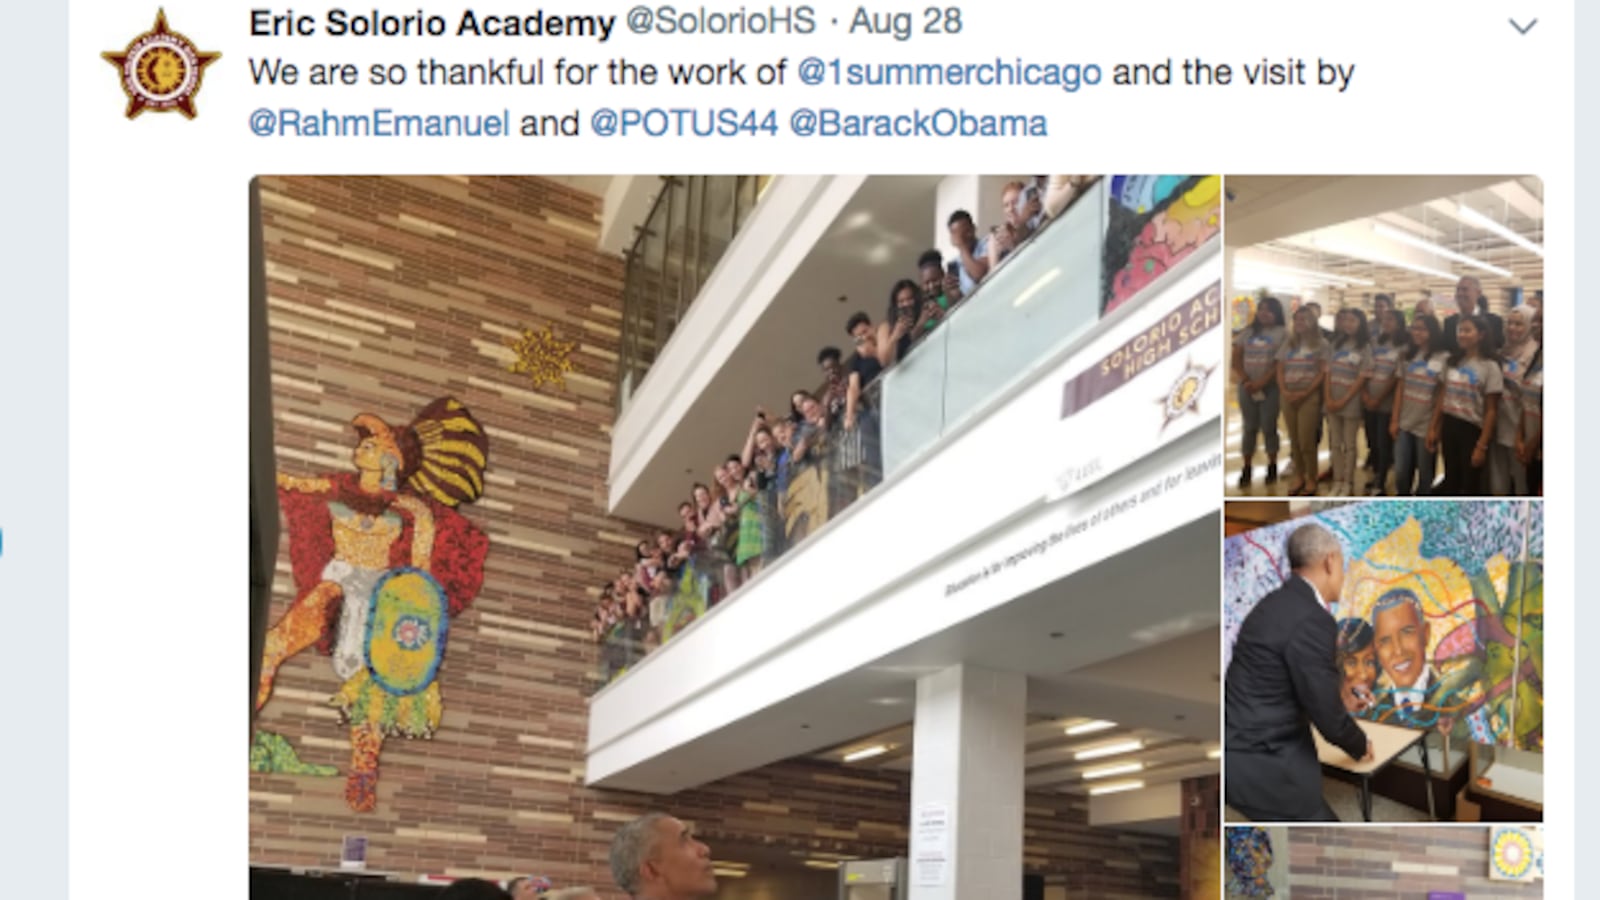 Chicago's Eric Solorio Academy tweeted about the visit of Mayor Rahm Emanuel and former President Barack Obama.